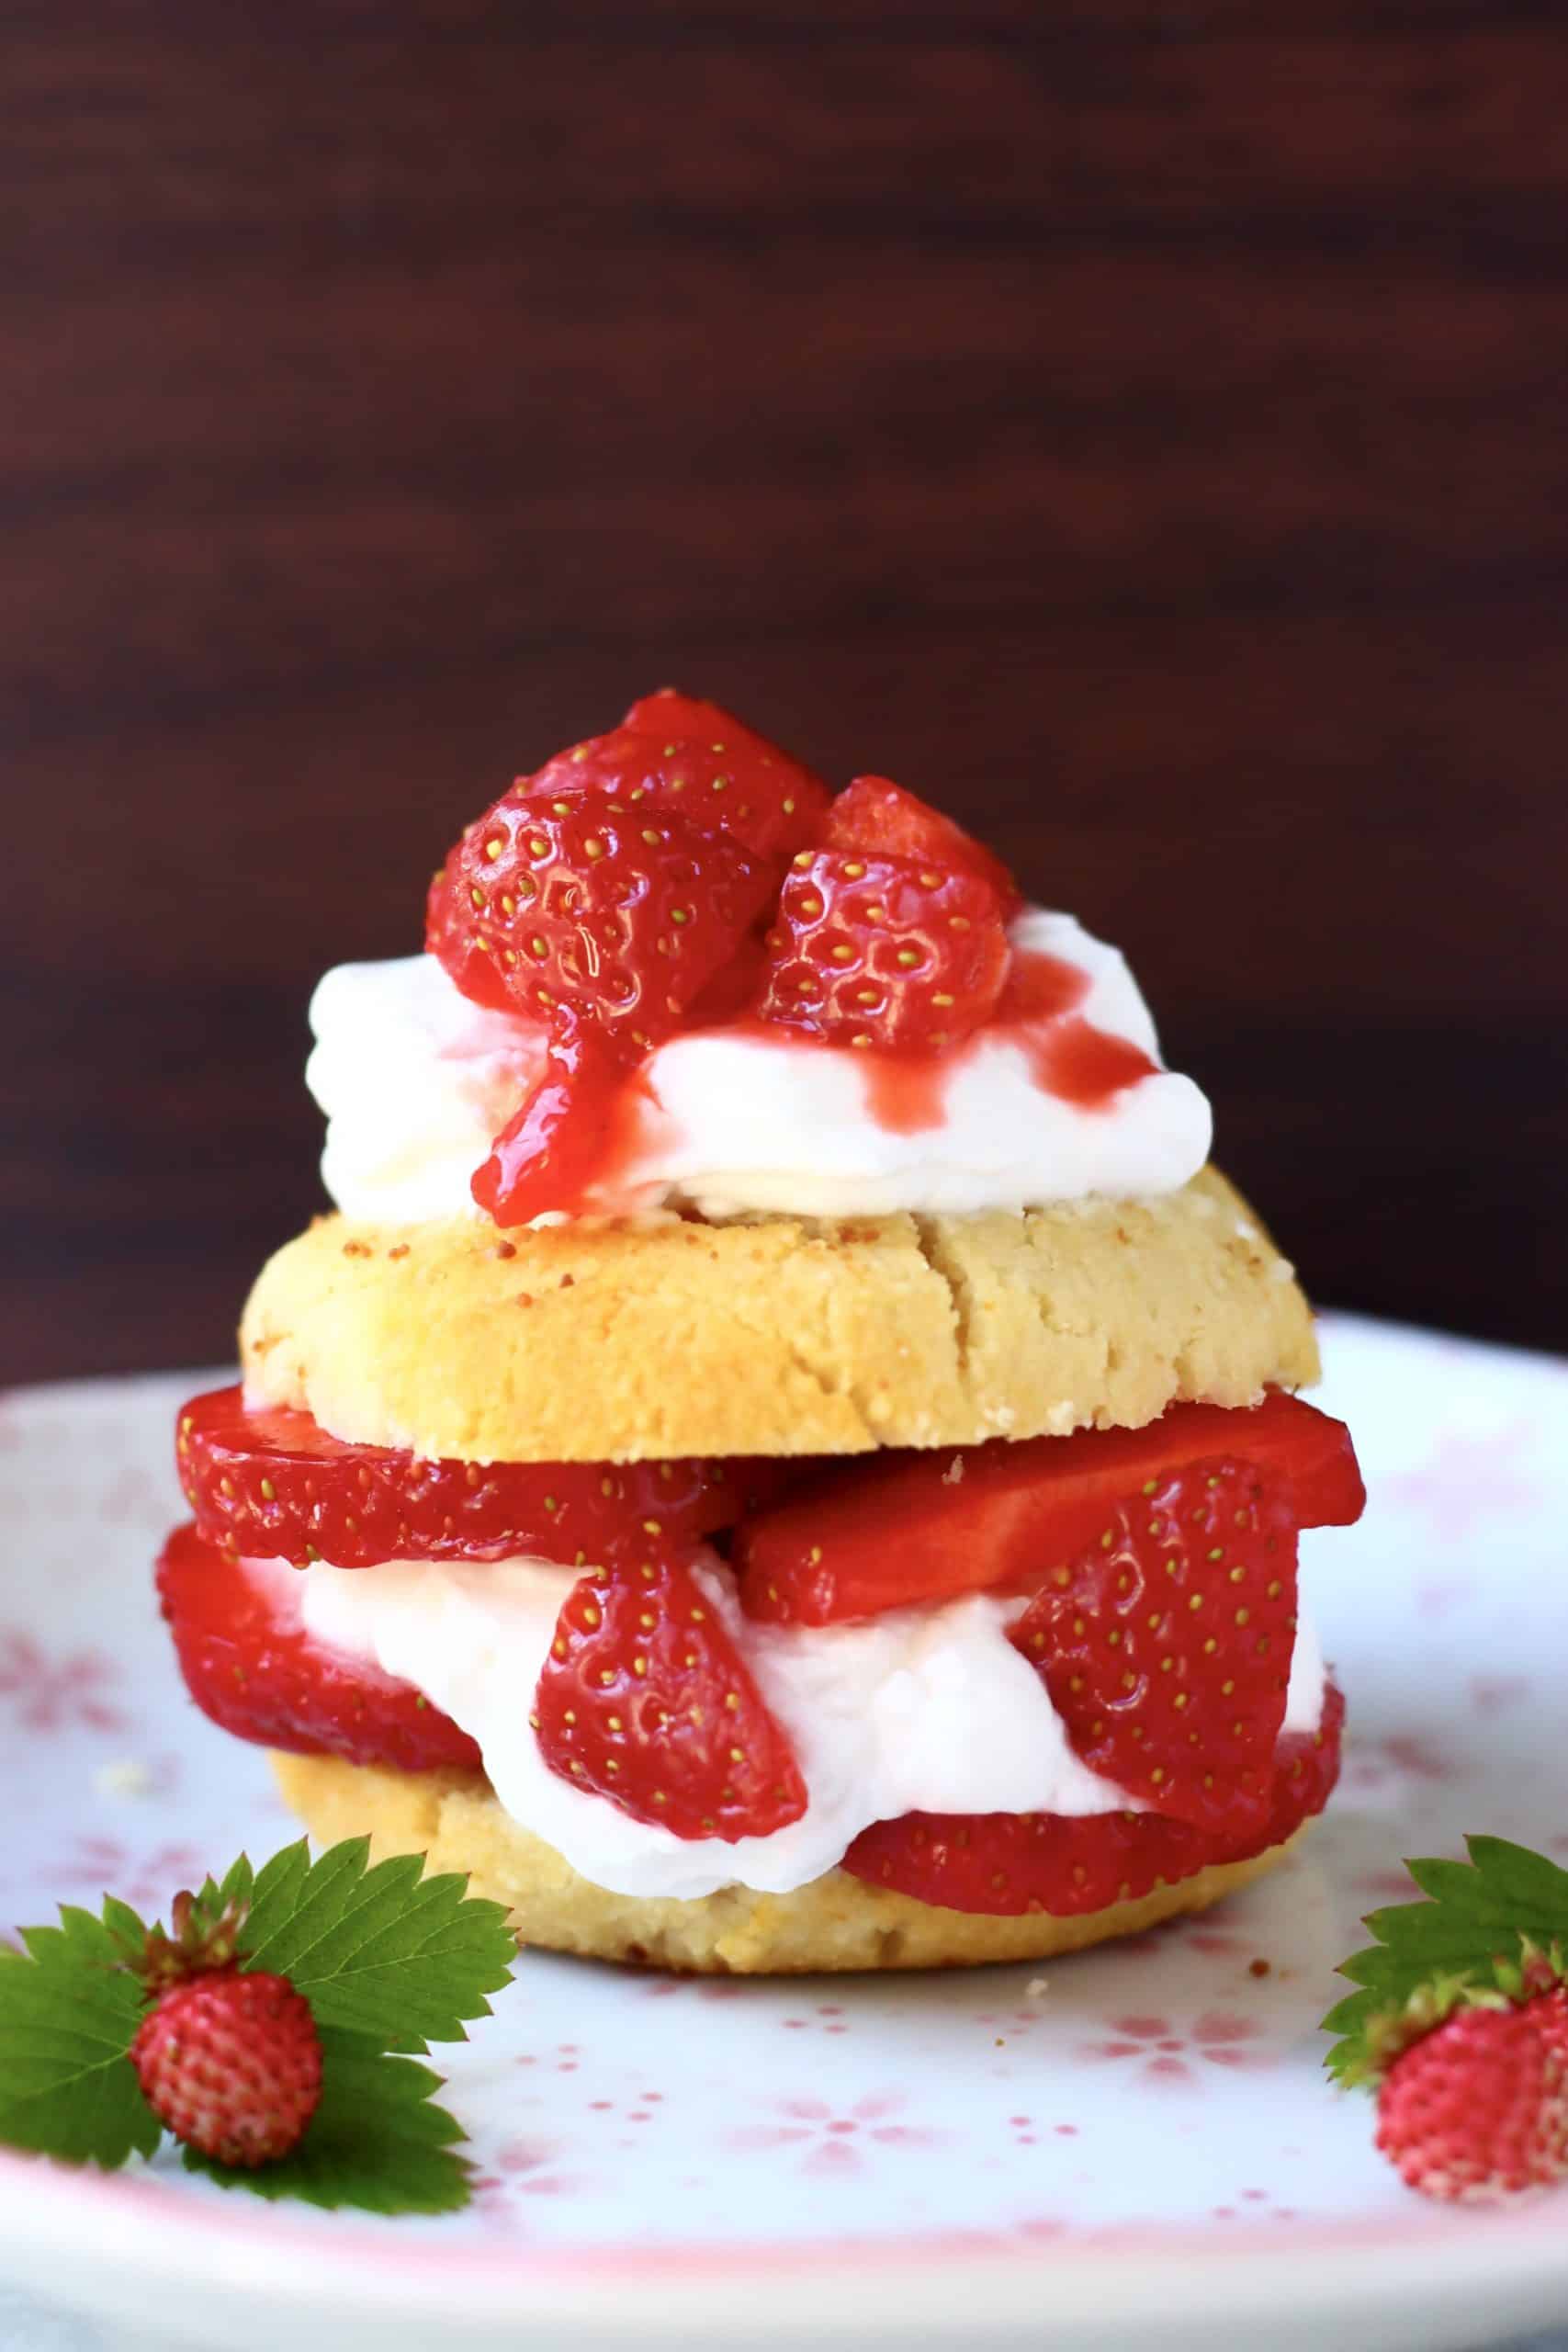 Strawberry shortcake with whipped cream and fresh strawberries